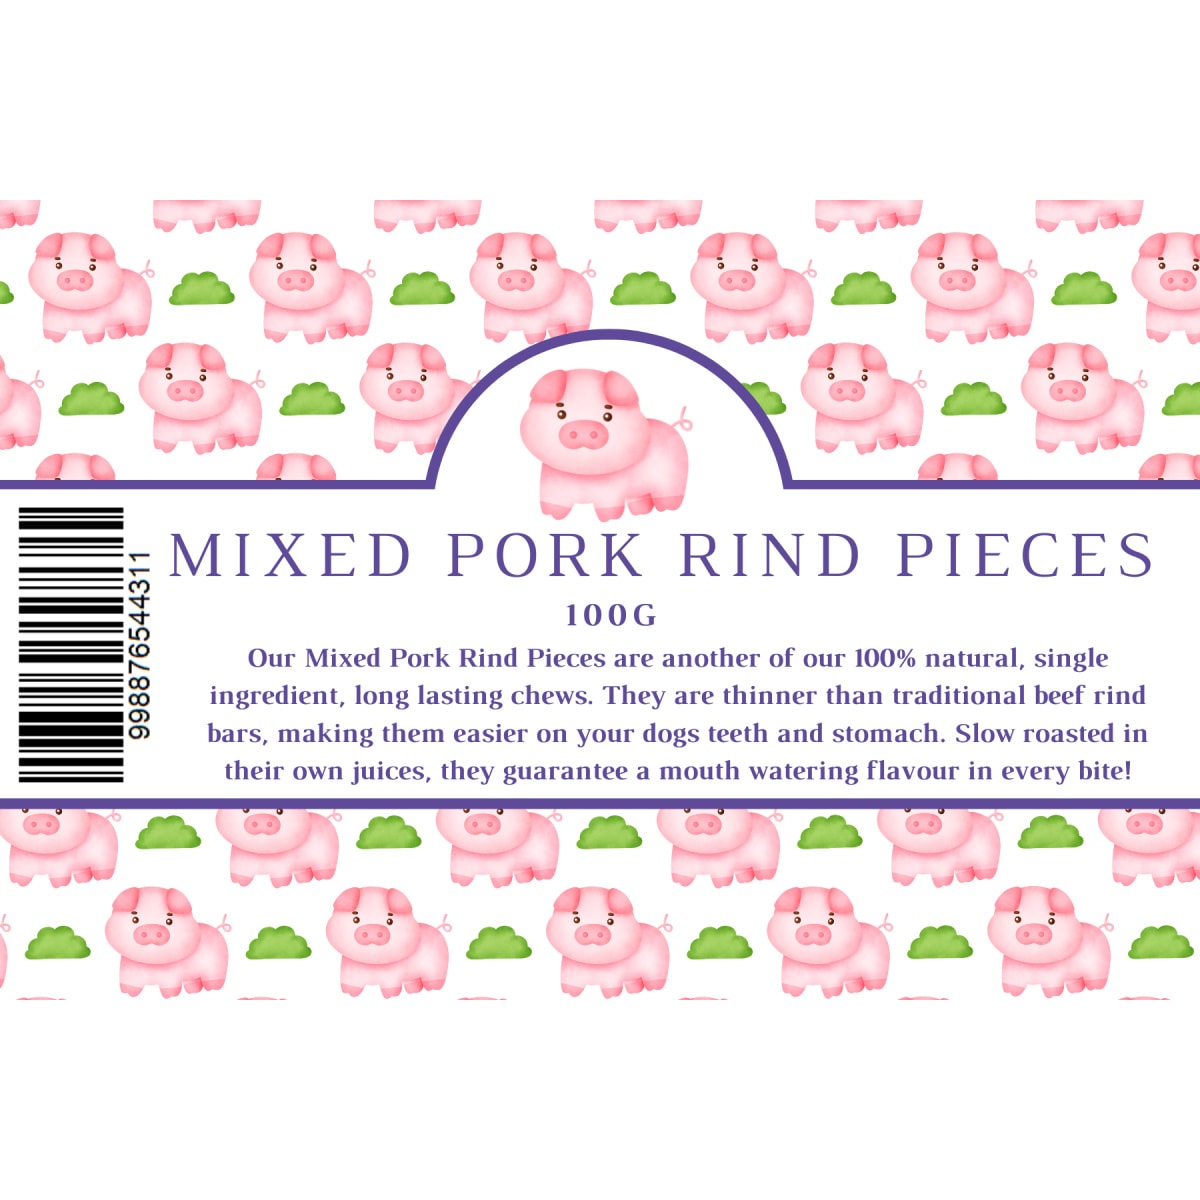 Mixed Pork Rind Pieces 100g Main Image